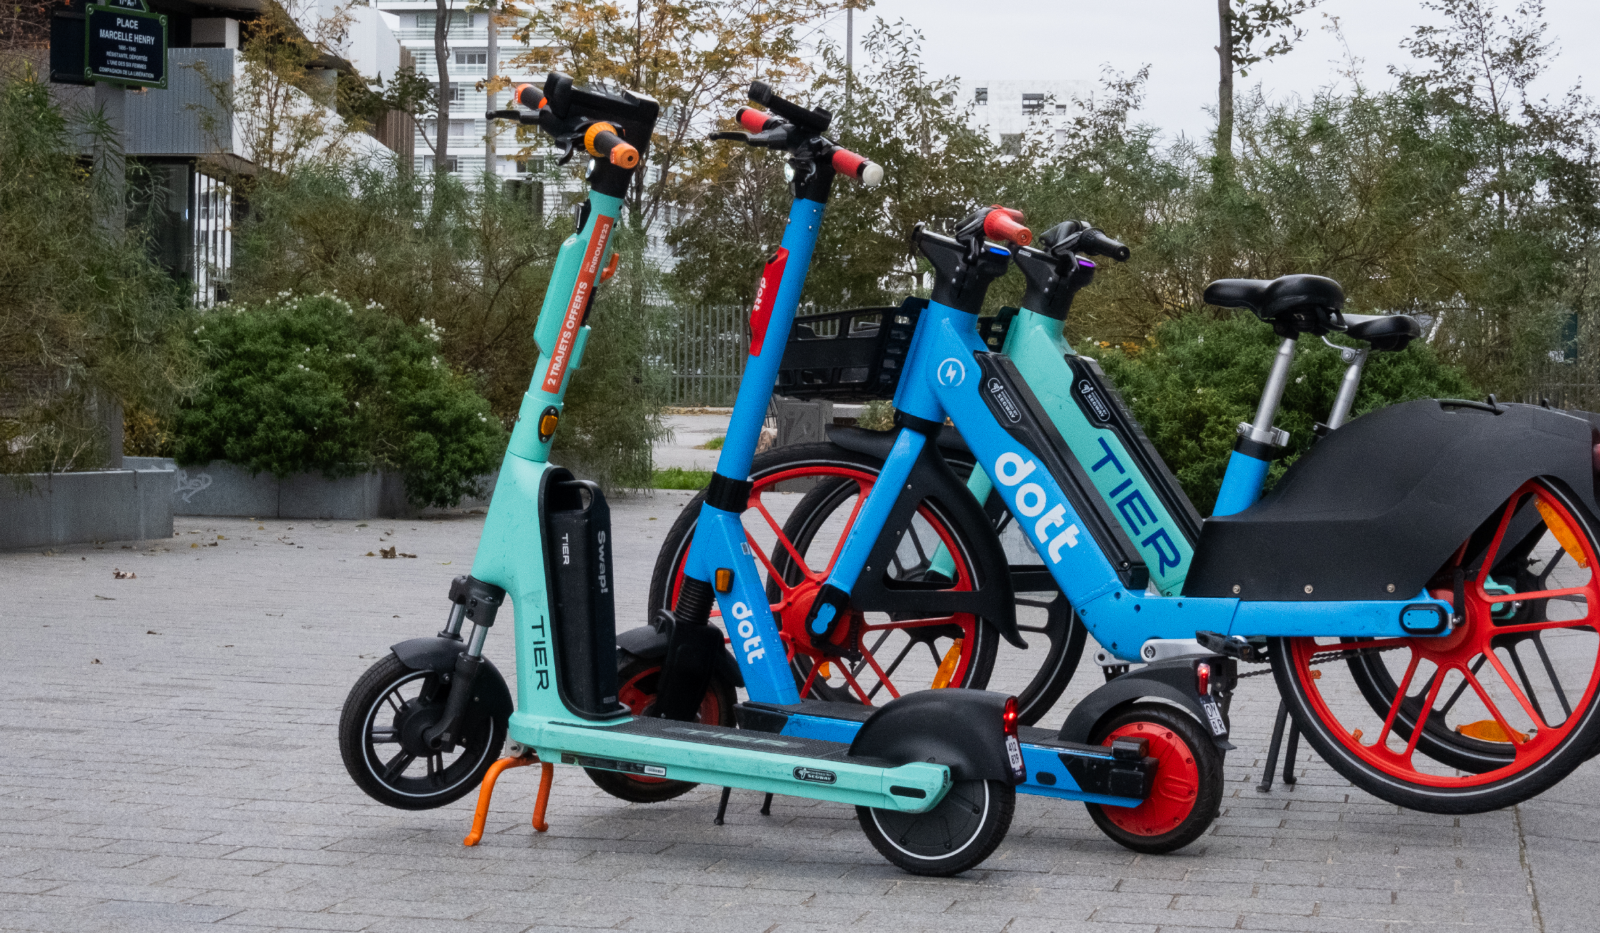 Micromobility startups Tier and Dott plan to merge to find a path to profitability